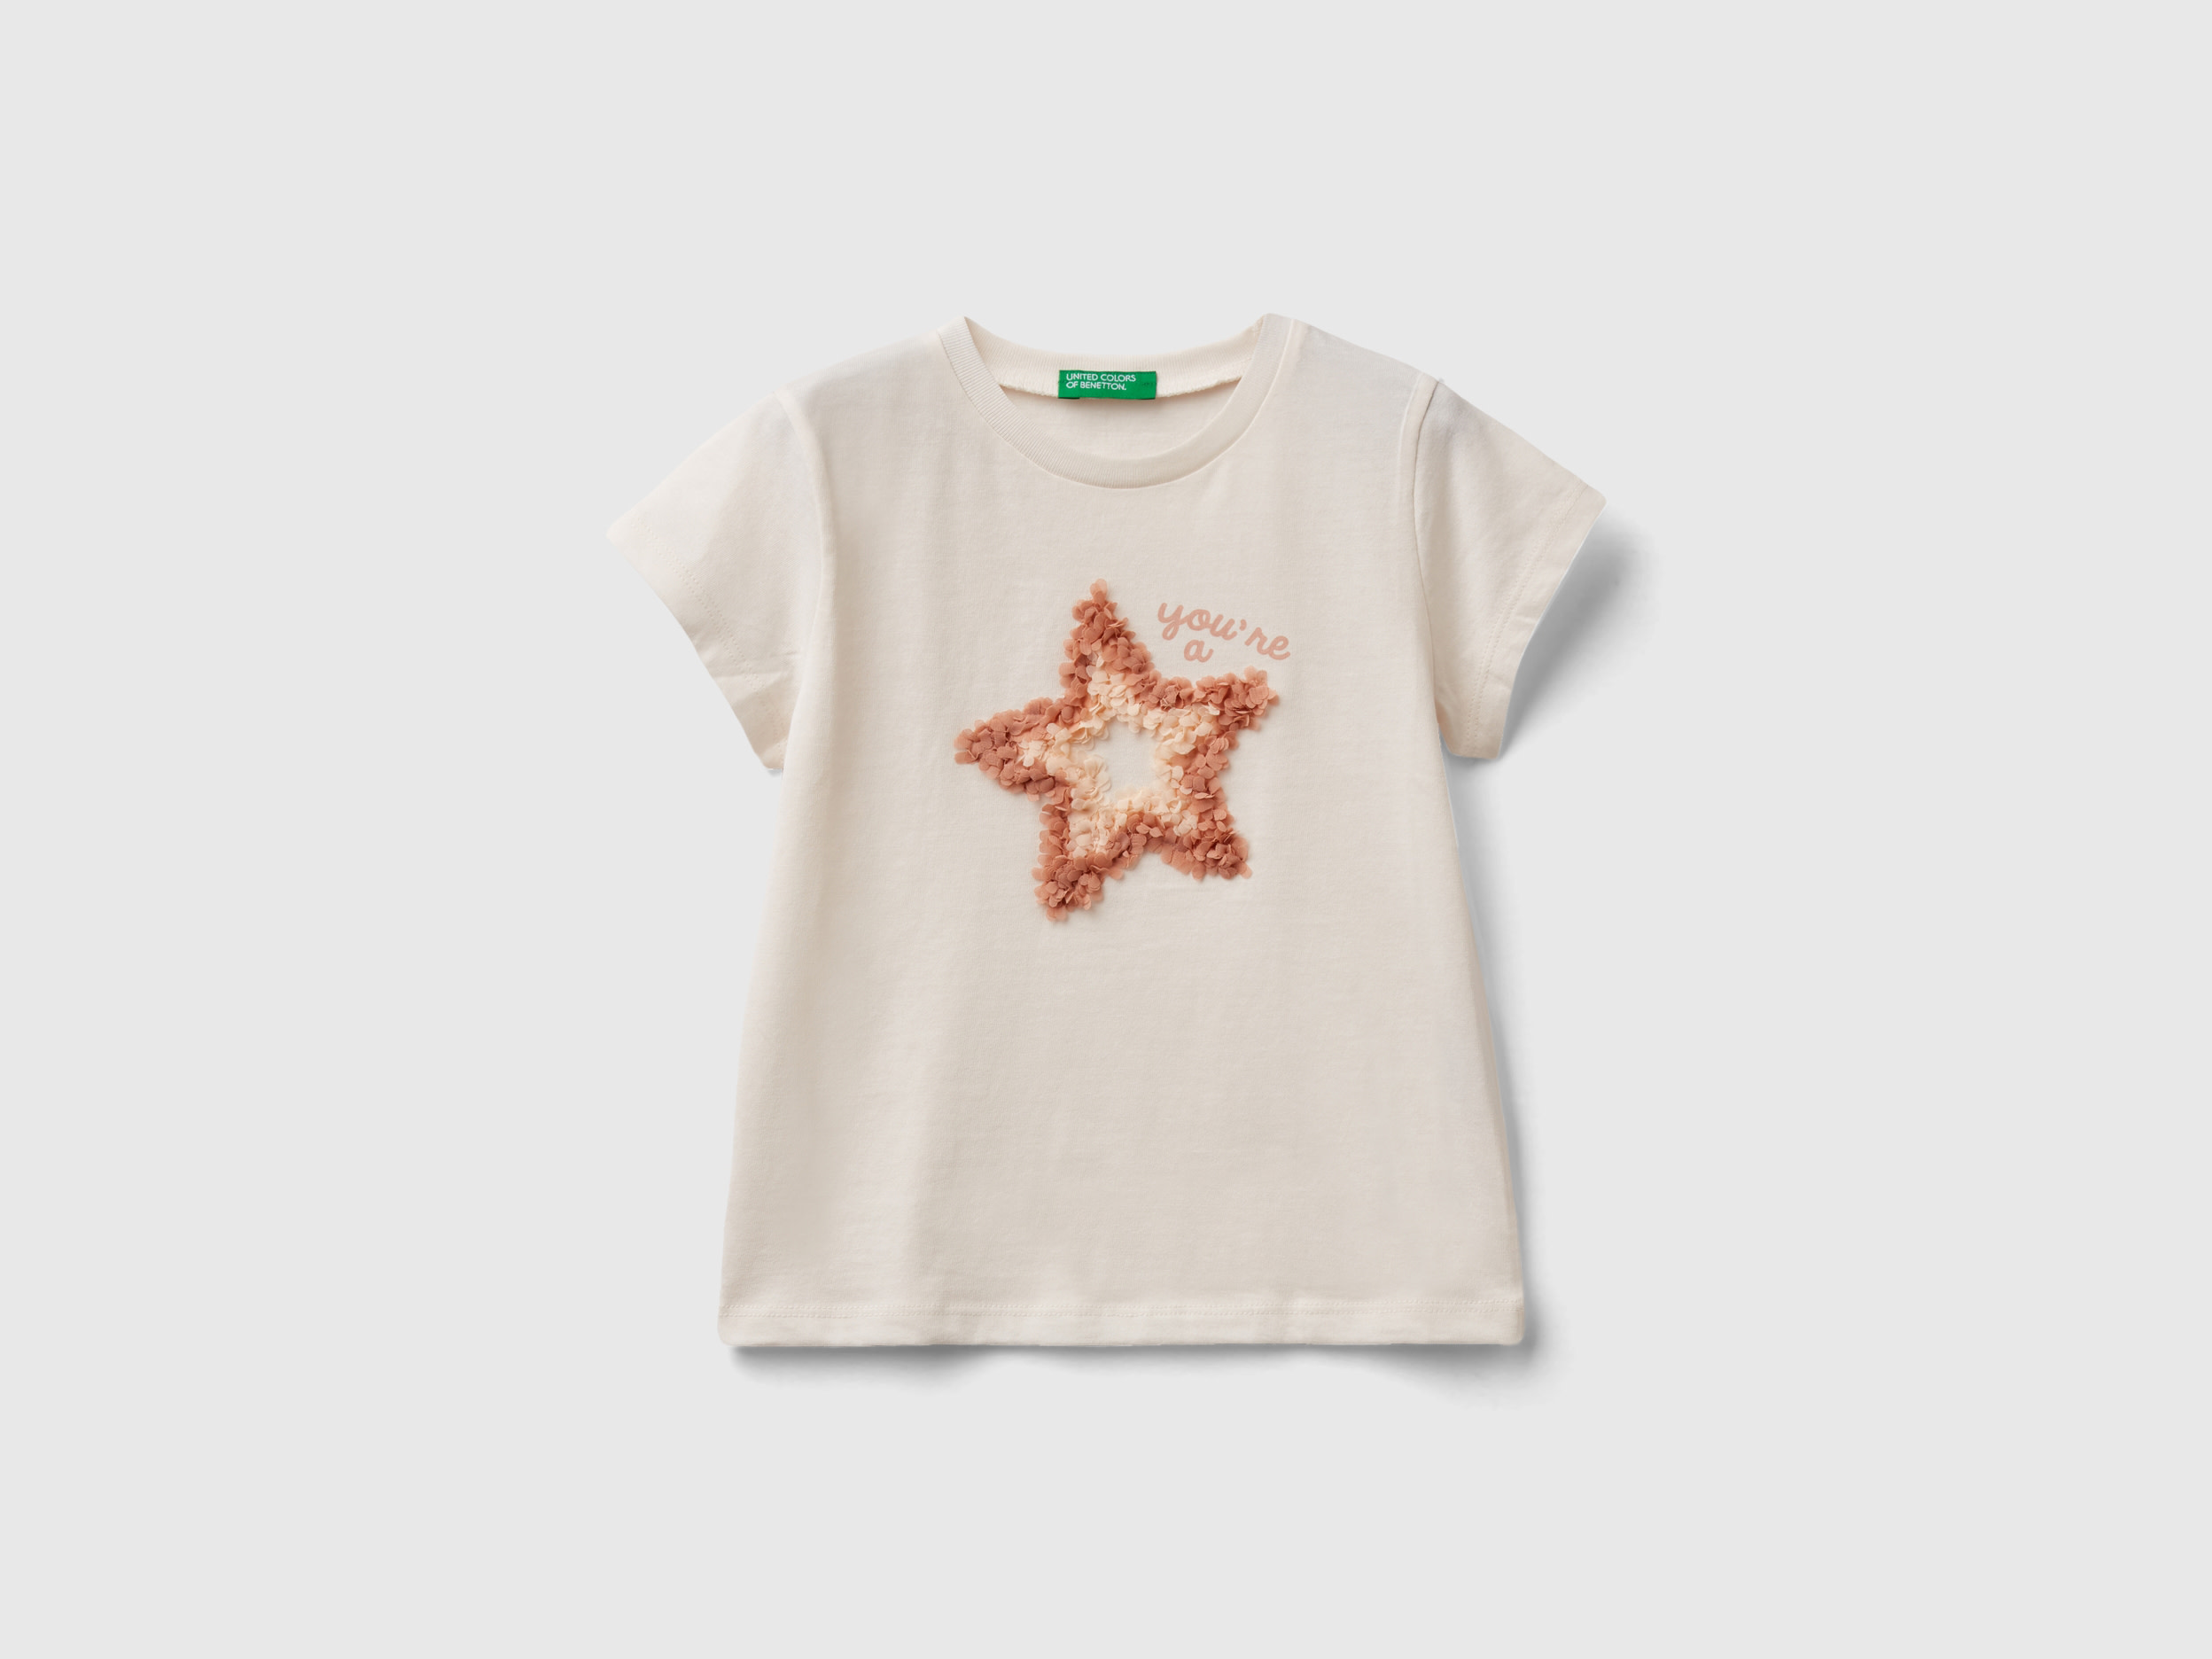 Image of Benetton, T-shirt With Petal Effect Applique, size 90, Creamy White, Kids